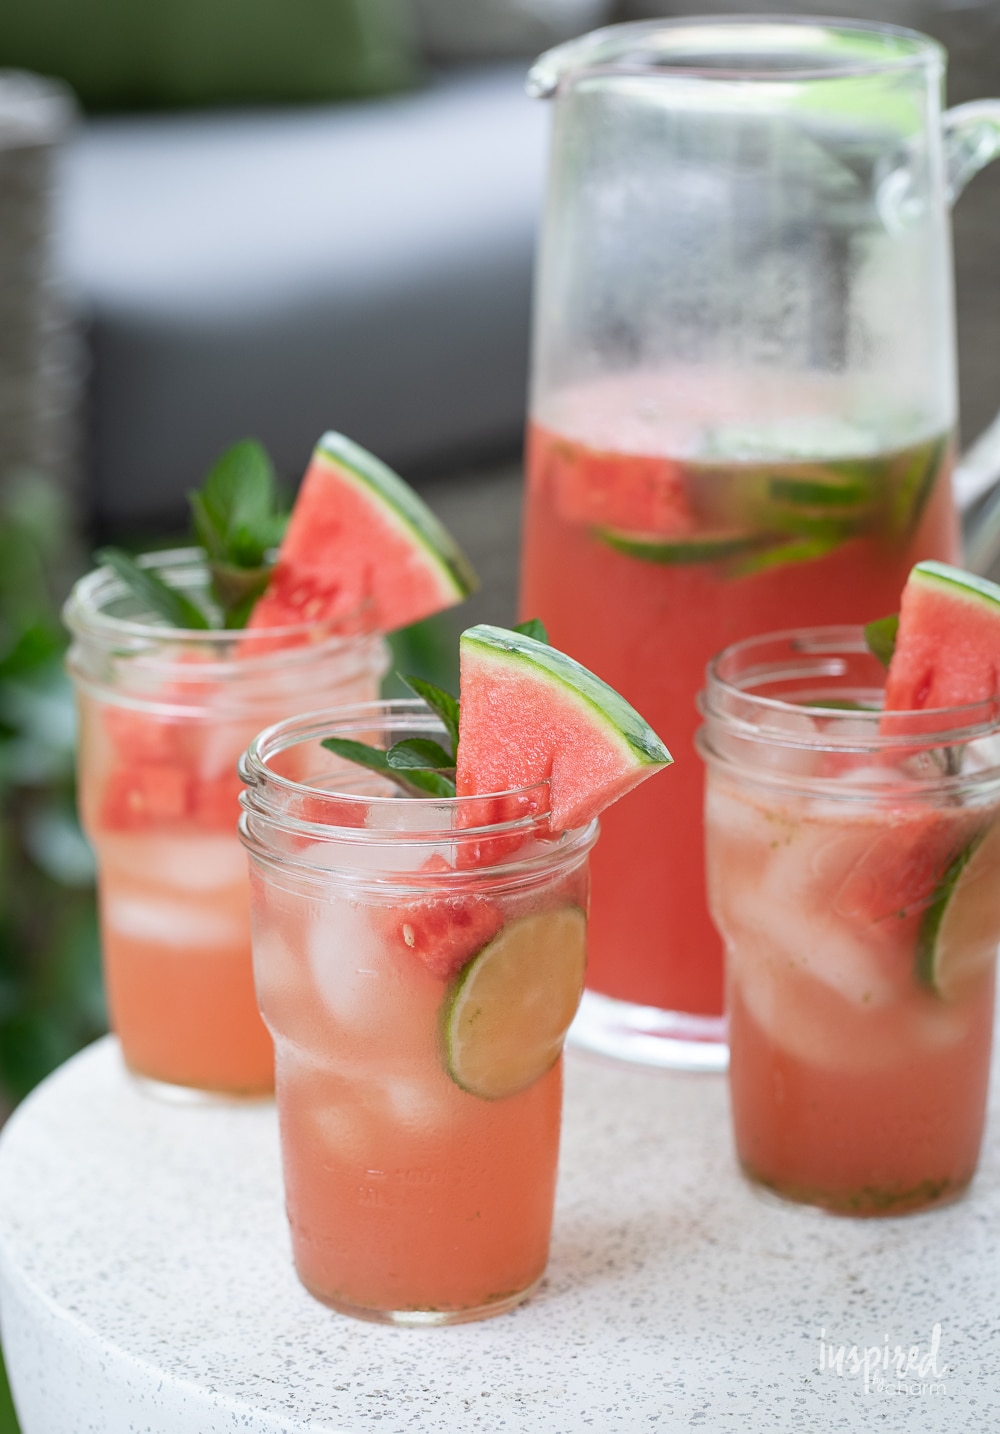 three glasses of watermelon sangria with a pitcher of sangria behind them.